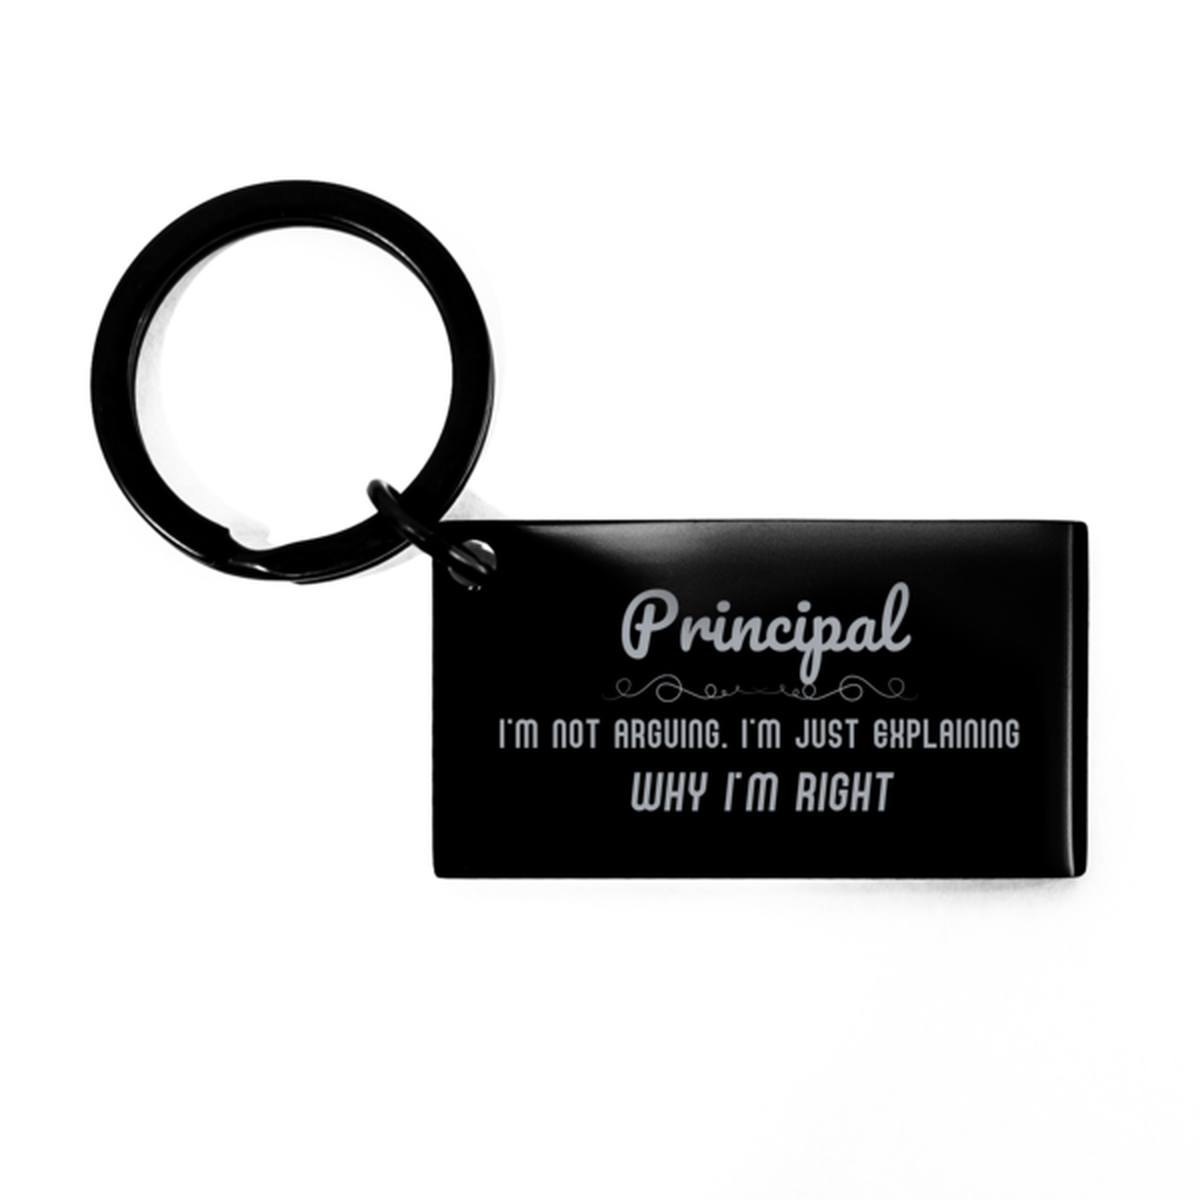 Principal I'm not Arguing. I'm Just Explaining Why I'm RIGHT Keychain, Funny Saying Quote Principal Gifts For Principal Graduation Birthday Christmas Gifts for Men Women Coworker